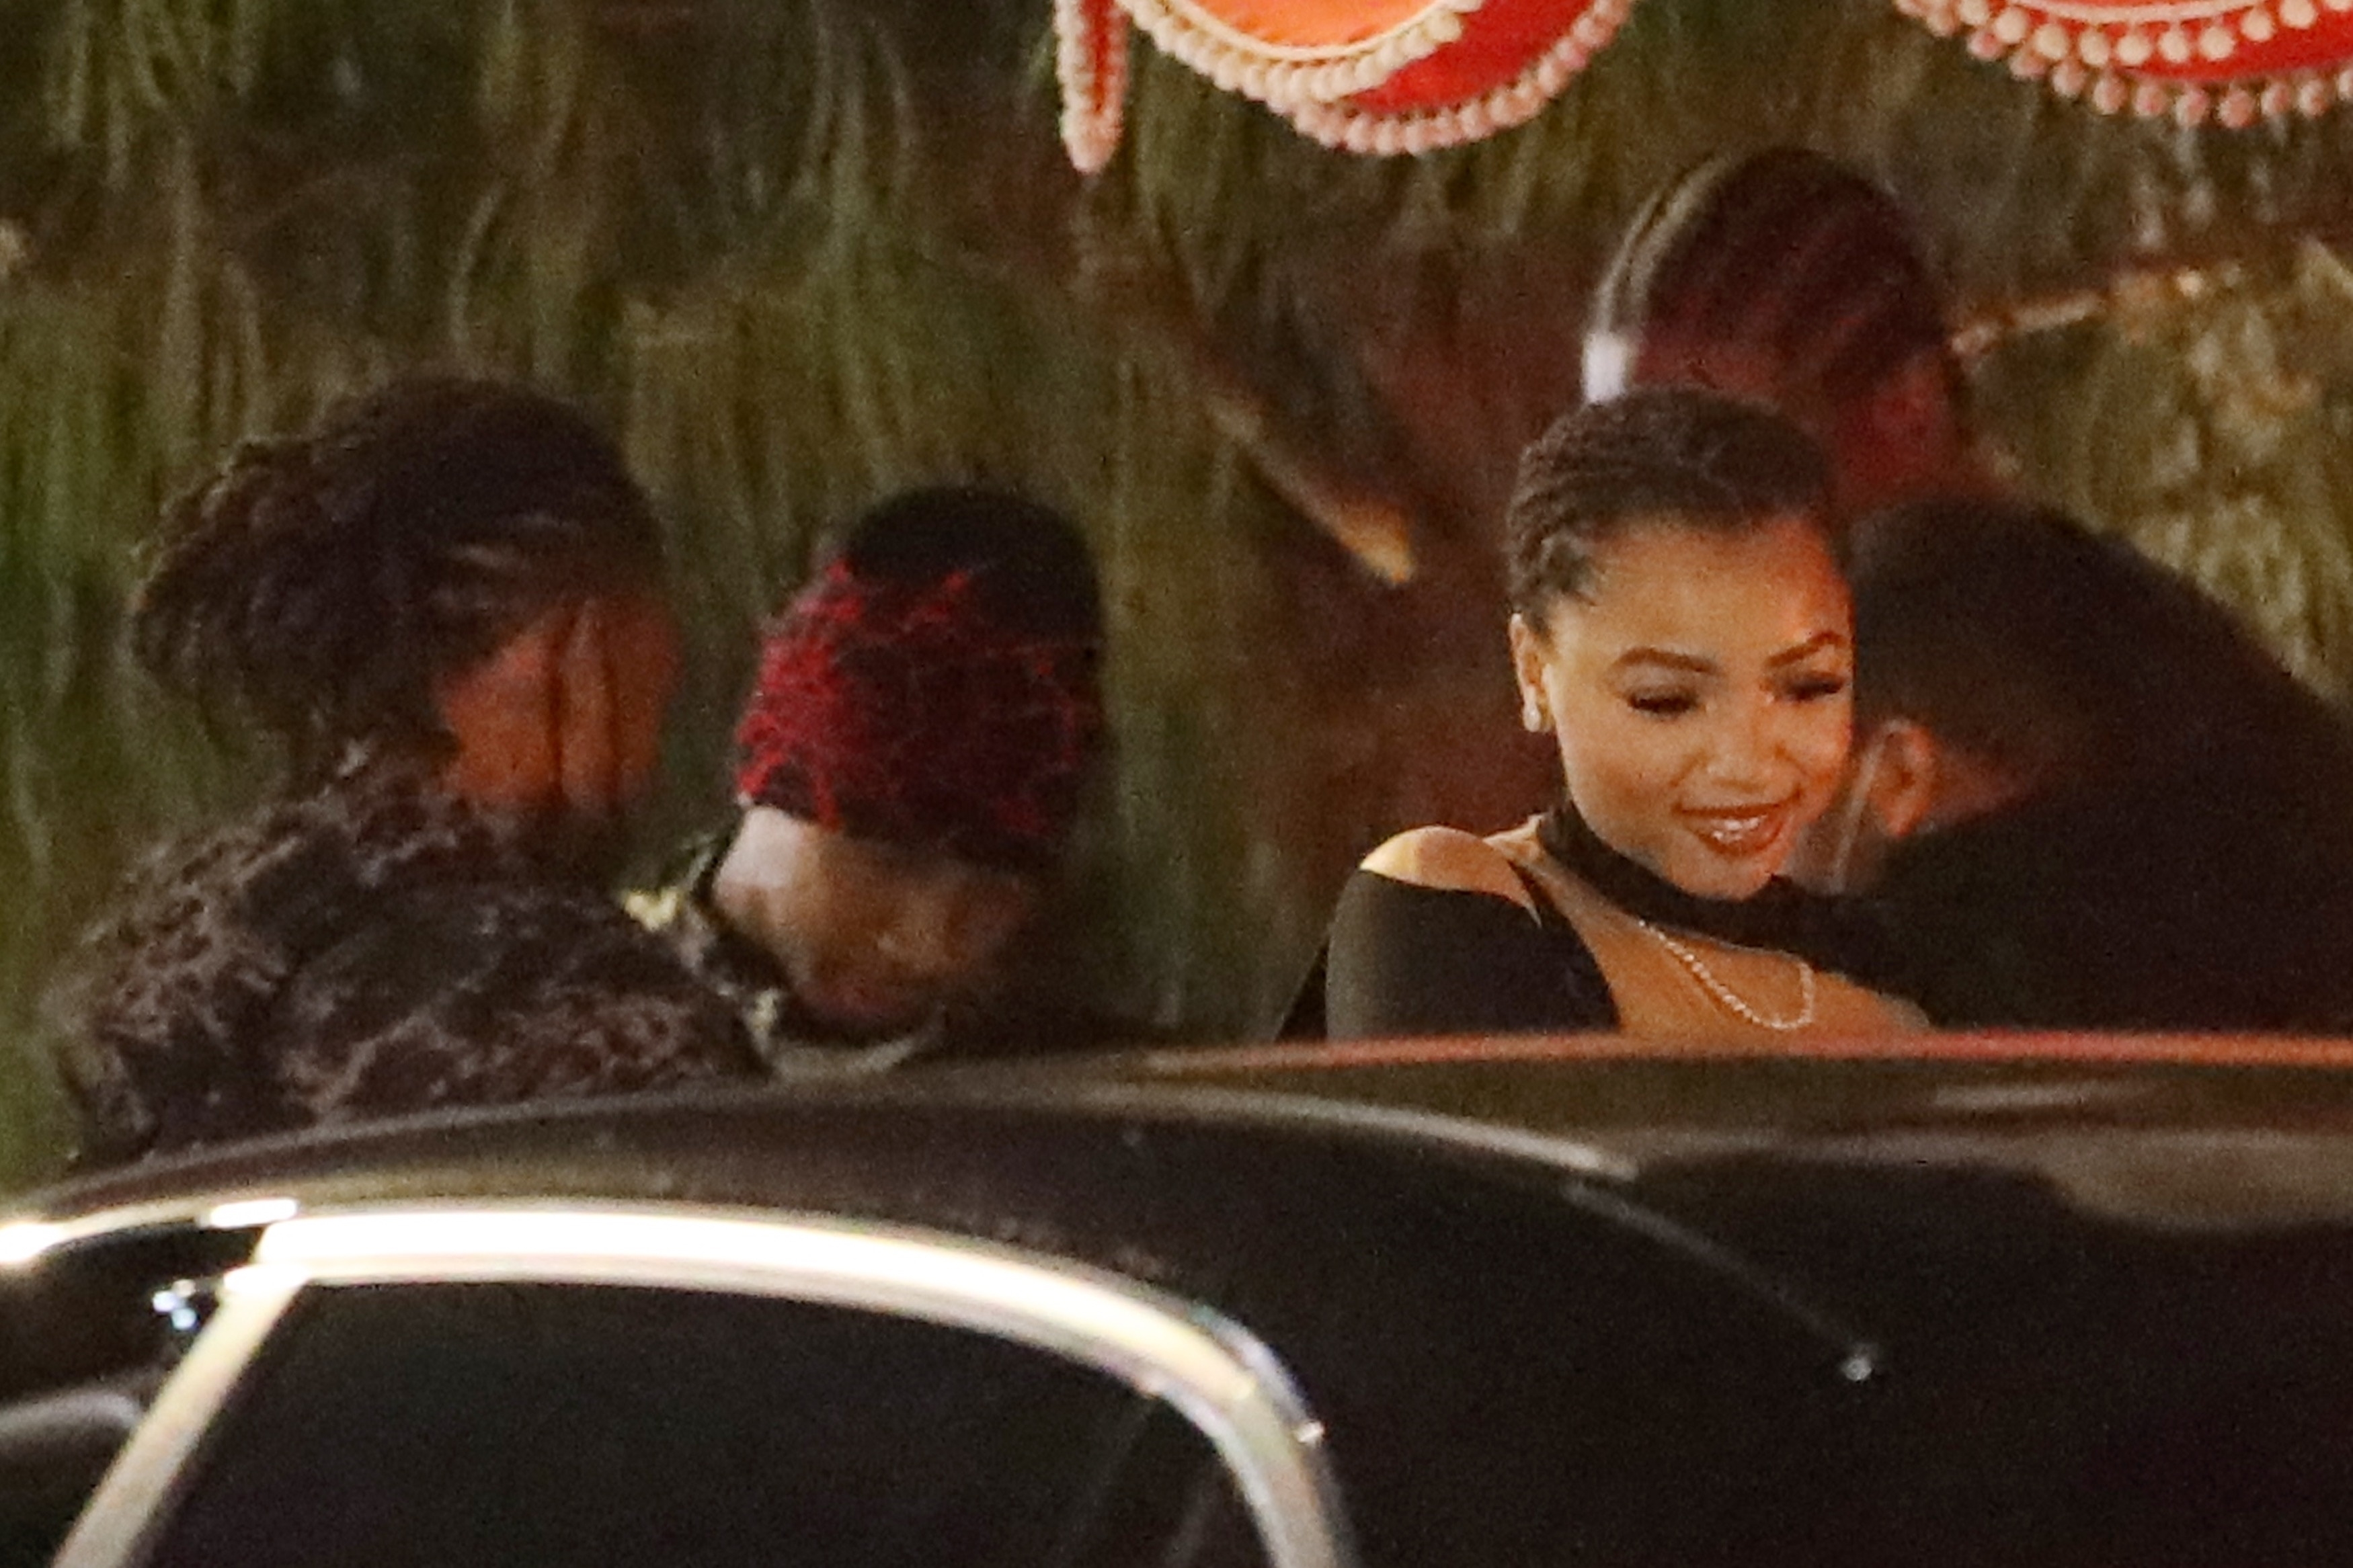 Tyga and Chloe were spotted leaving a nightclub in West Hollywood, California